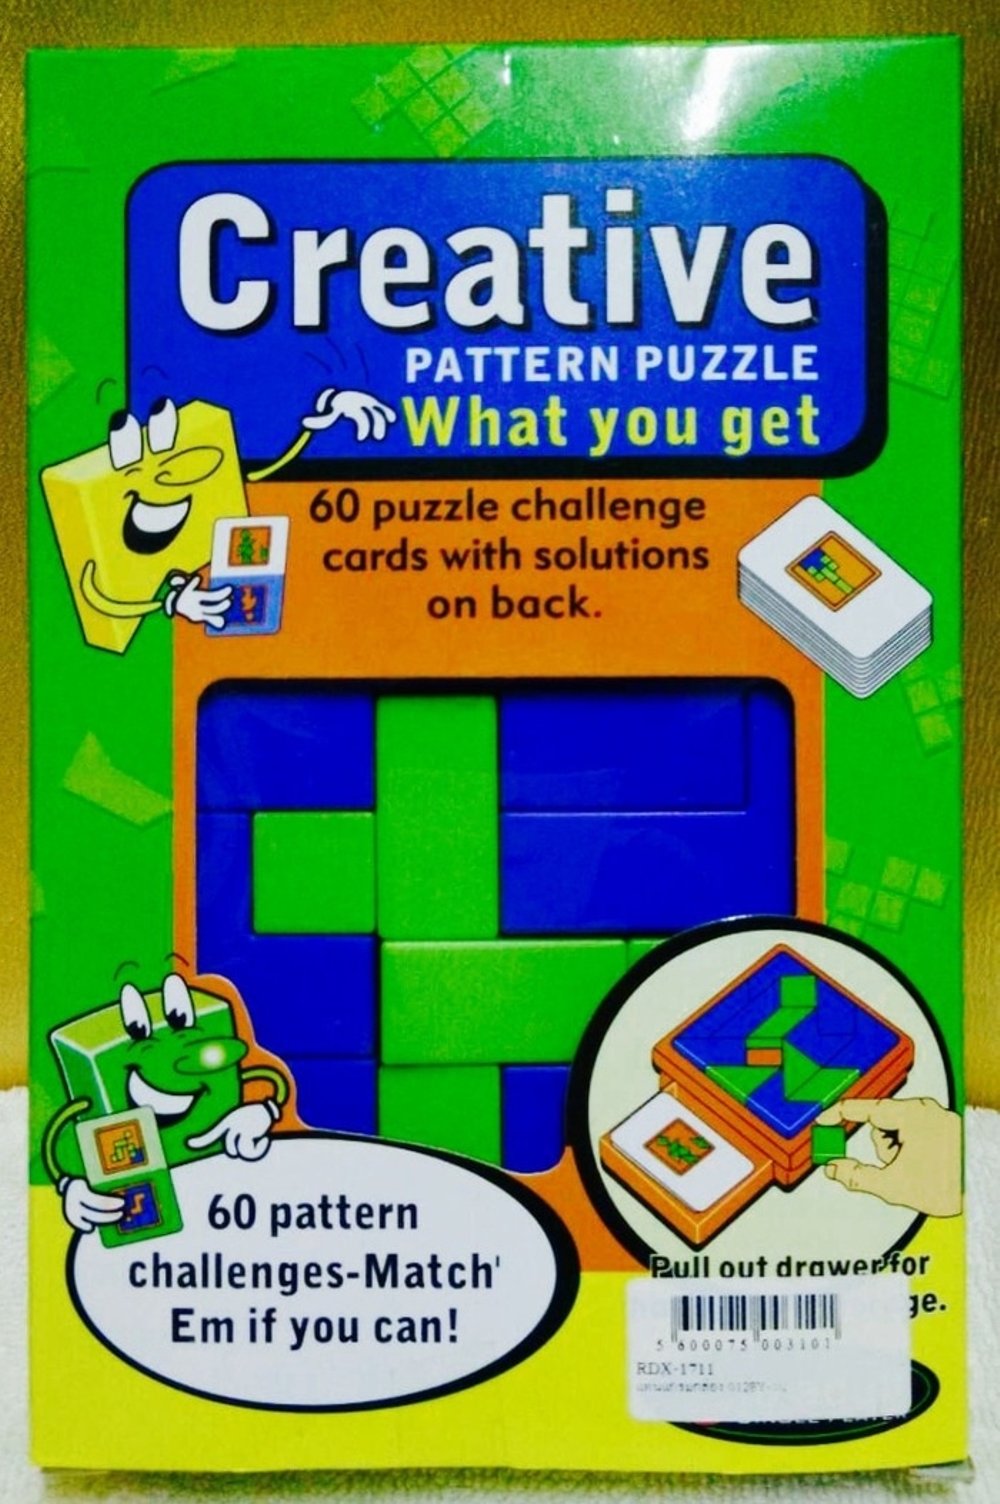 Creative Pattern Puzzle Game with 60 Challenge Cards